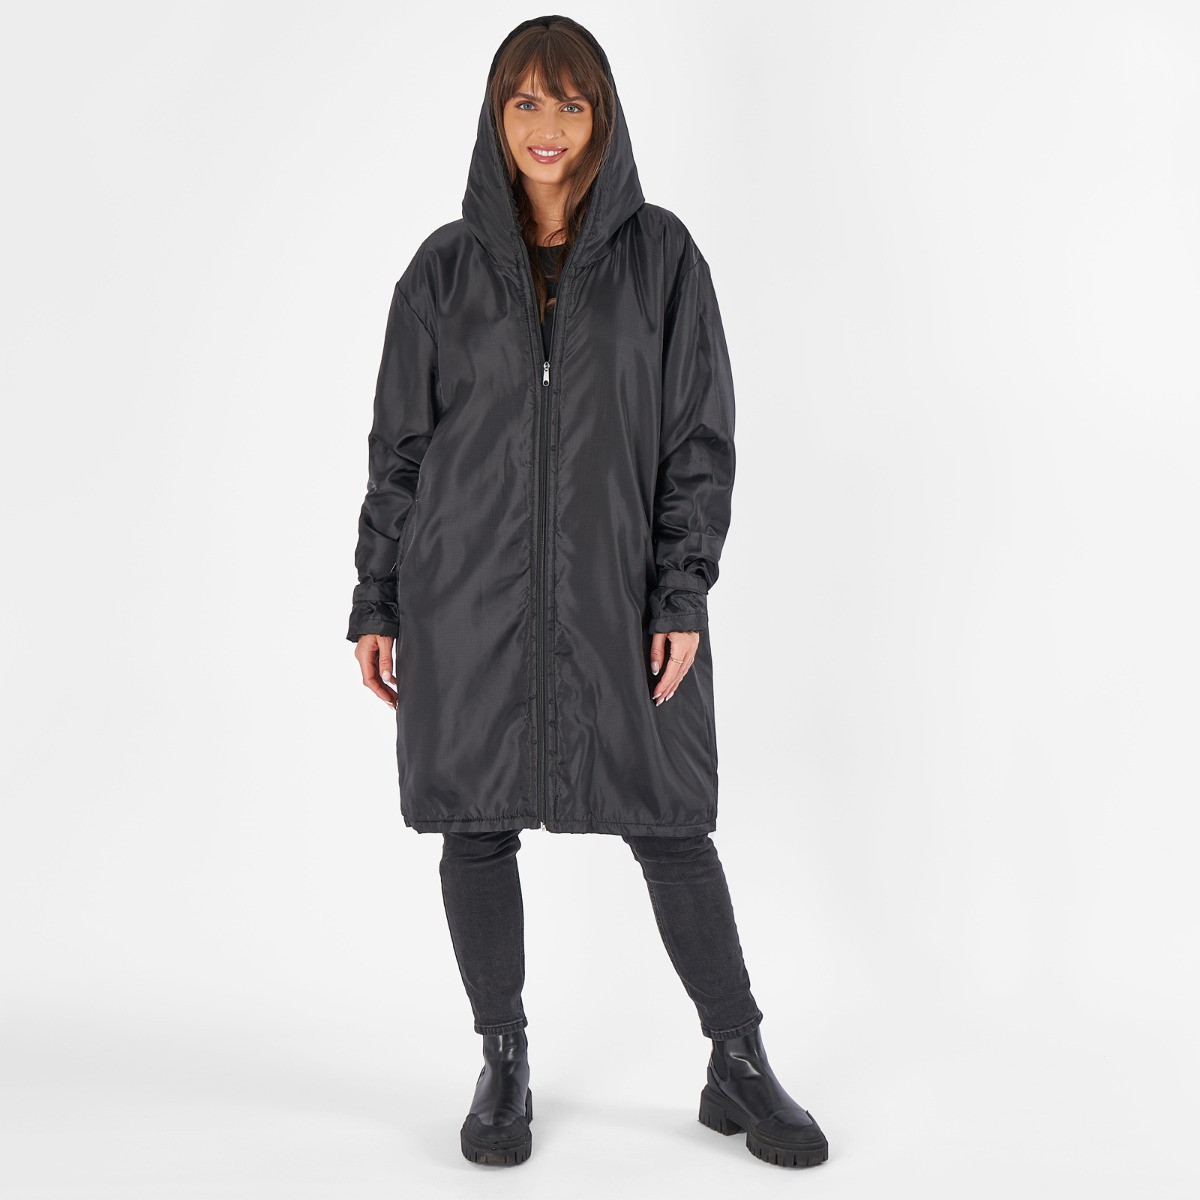 OHS Water Resistant Full Zip Changing Robe, Black - M/L>